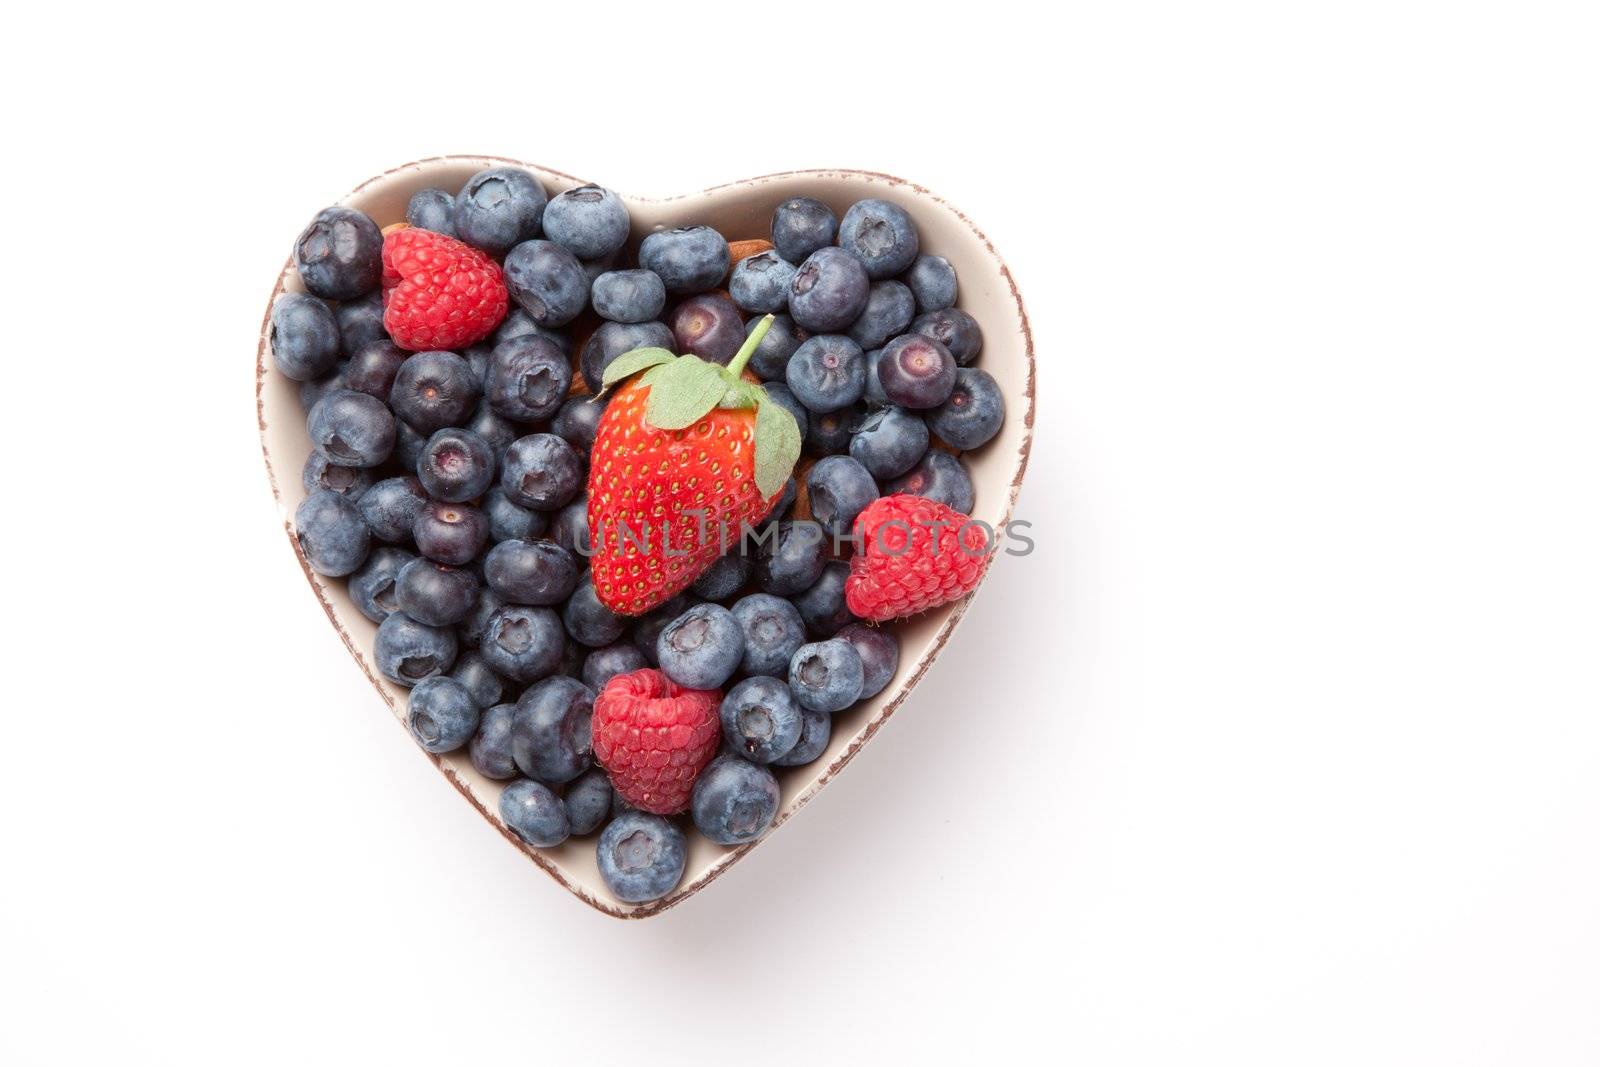 Different berries in  a heart shaped bowl by Wavebreakmedia